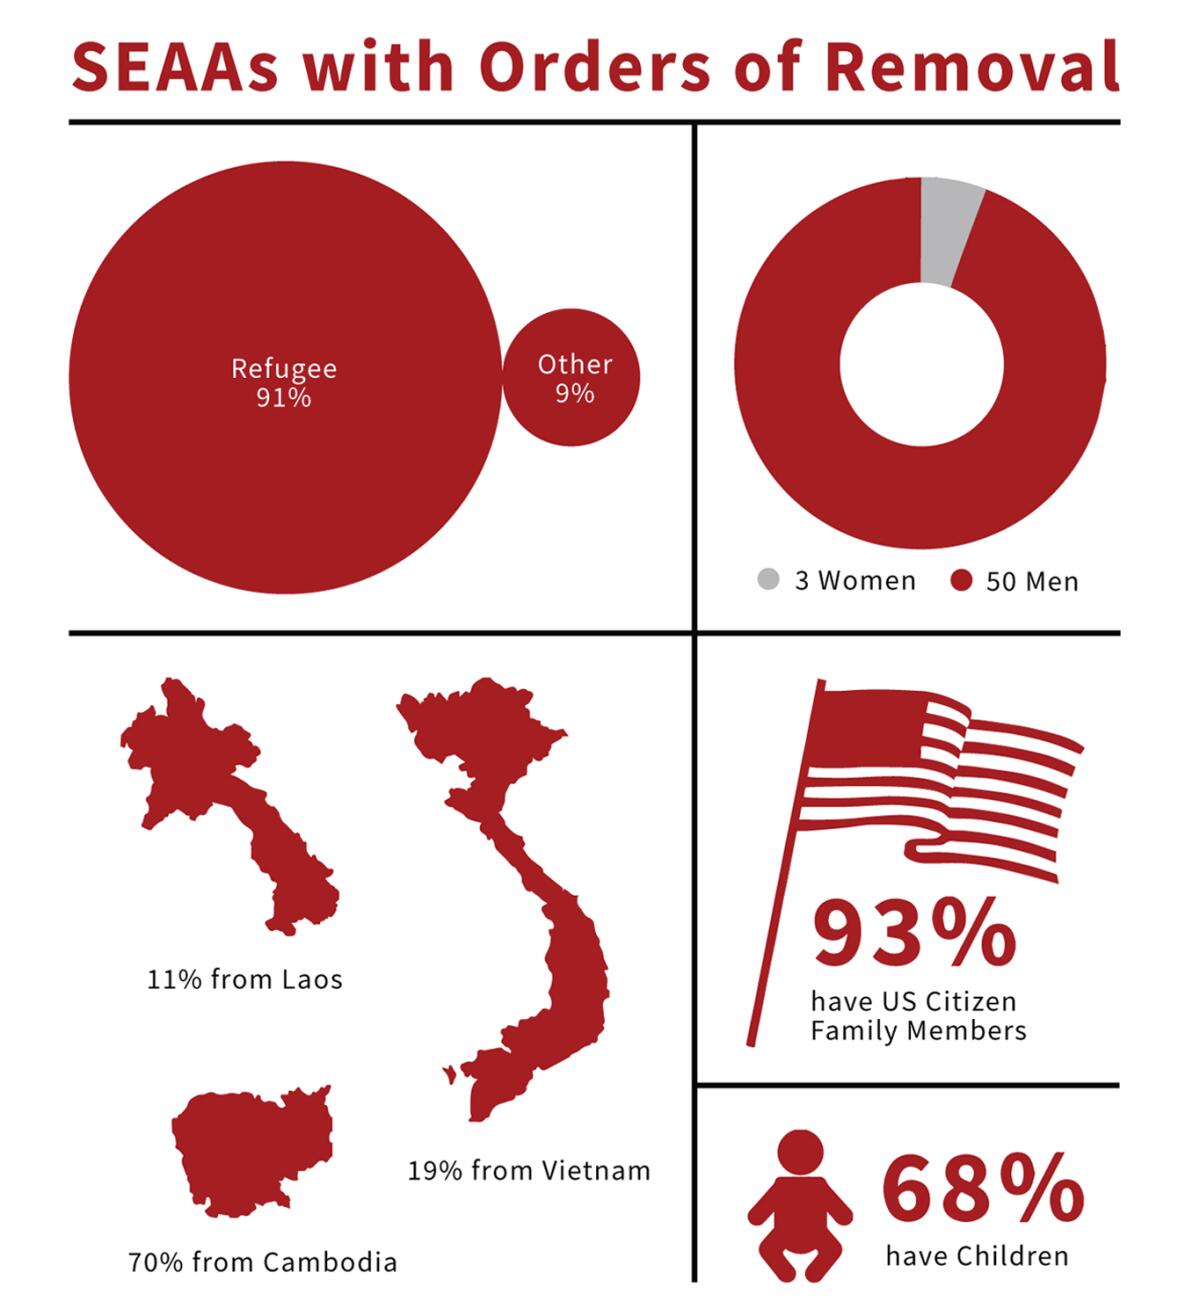 SEAAs with orders of removal